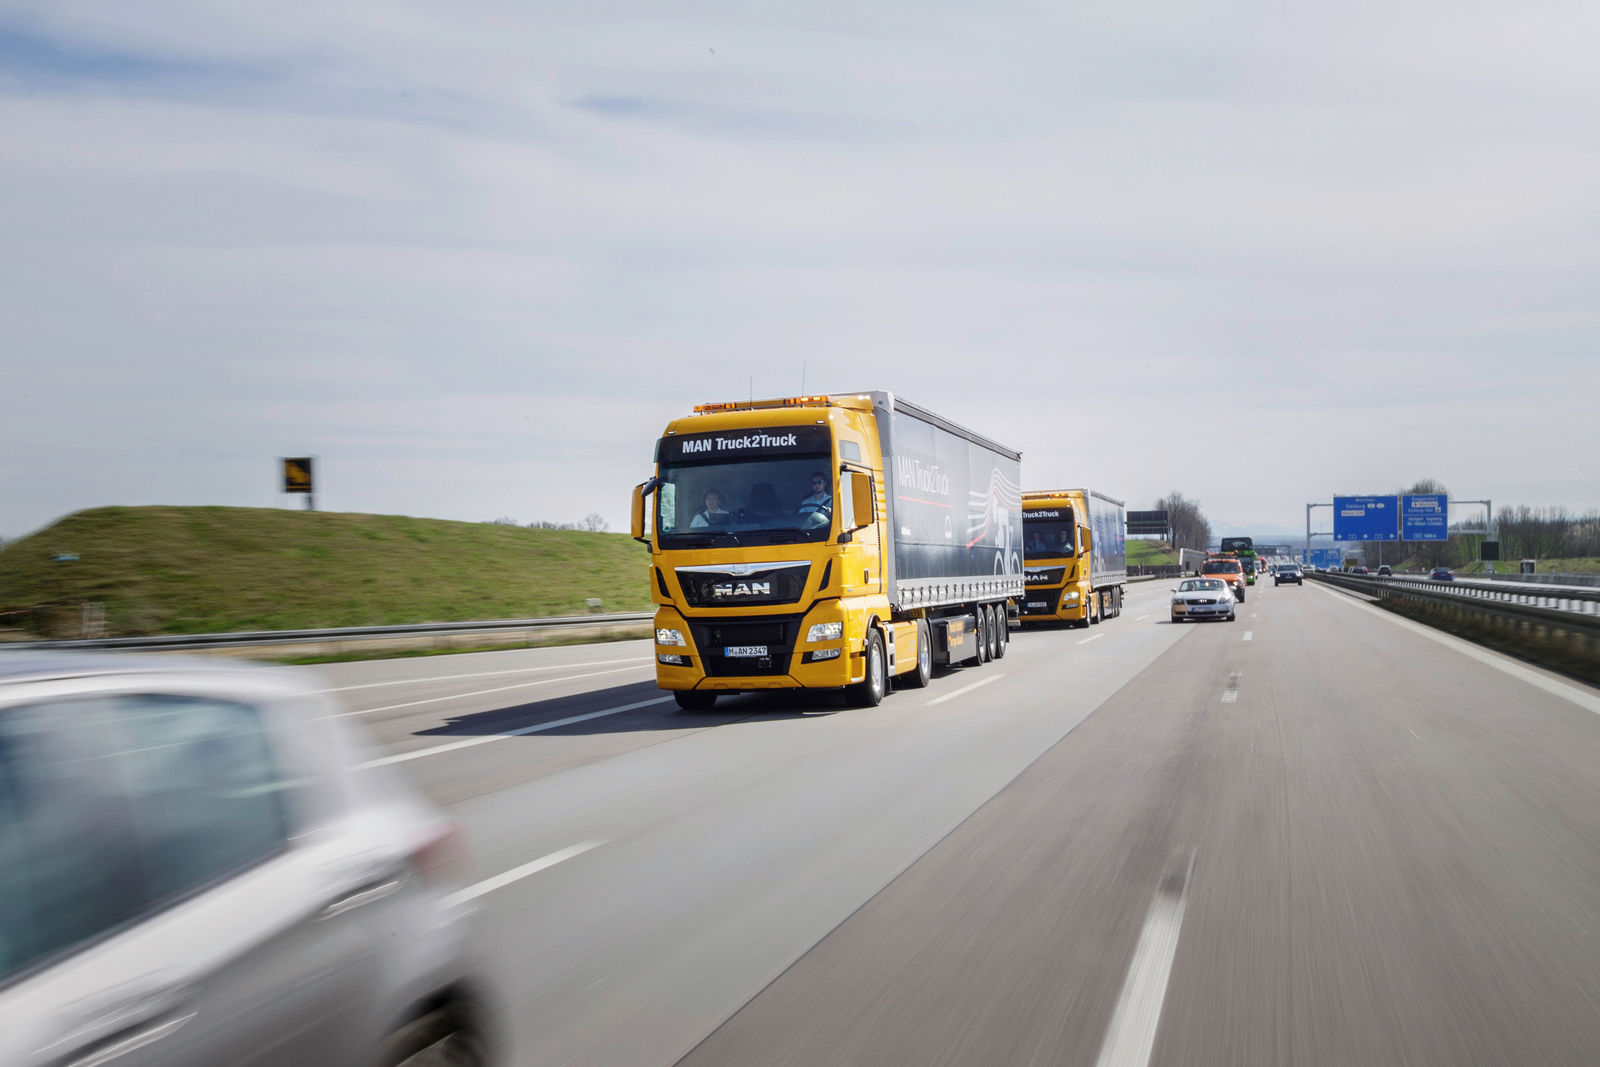 Goods transport of the future: MAN and Scania rely on digitally connected trucks